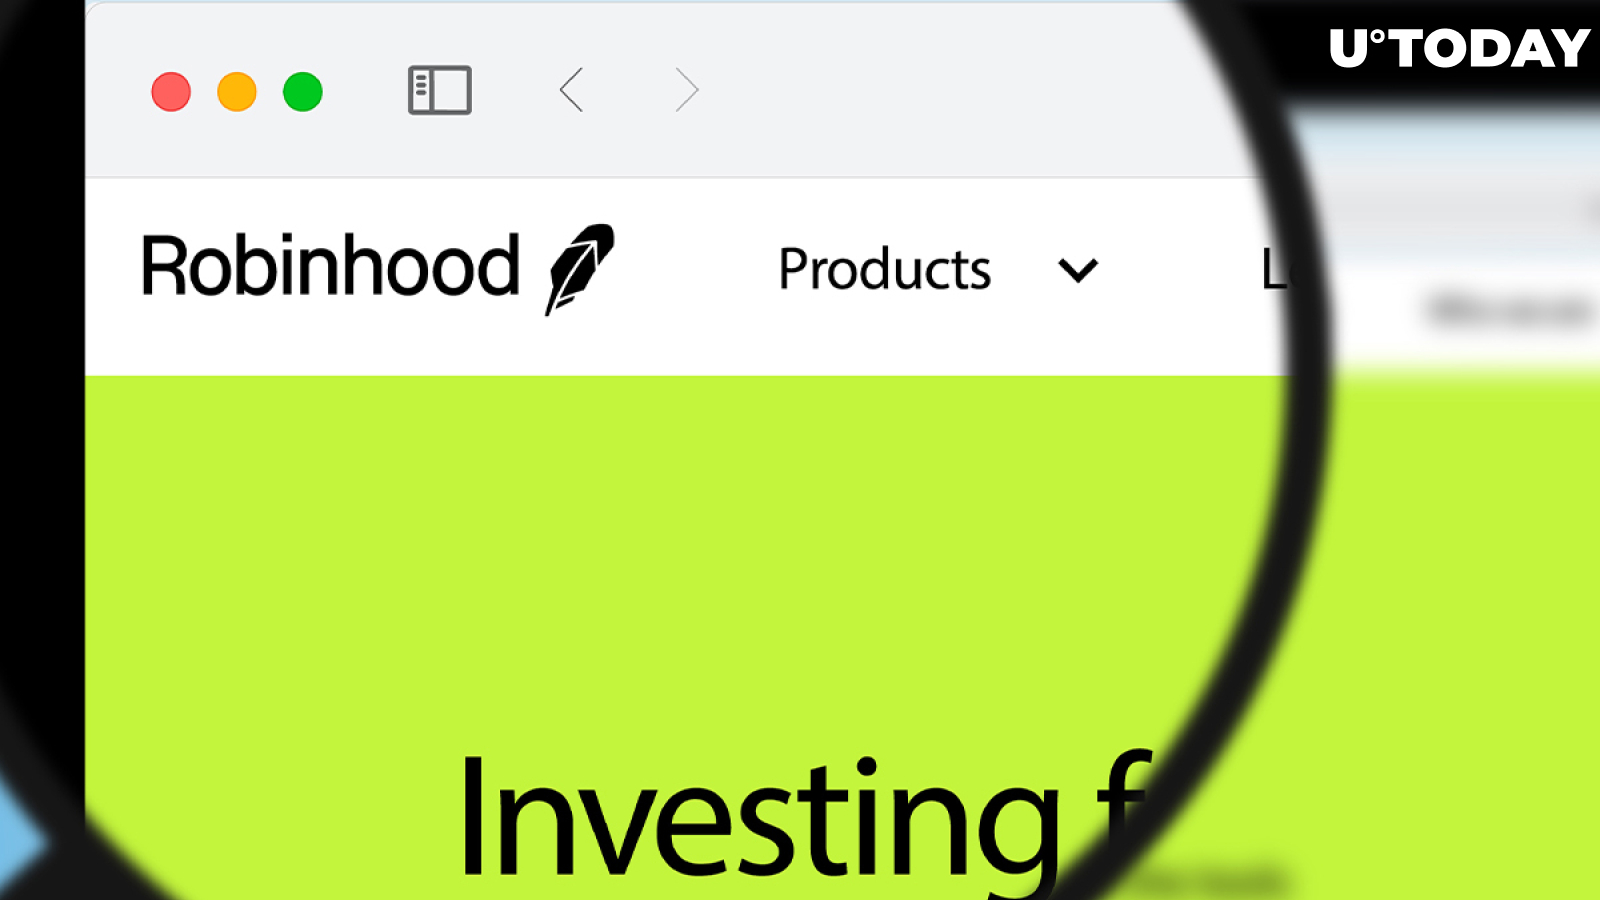 Grayscale’s Top Executive Joins Robinhood as New Chief Compliance Officer